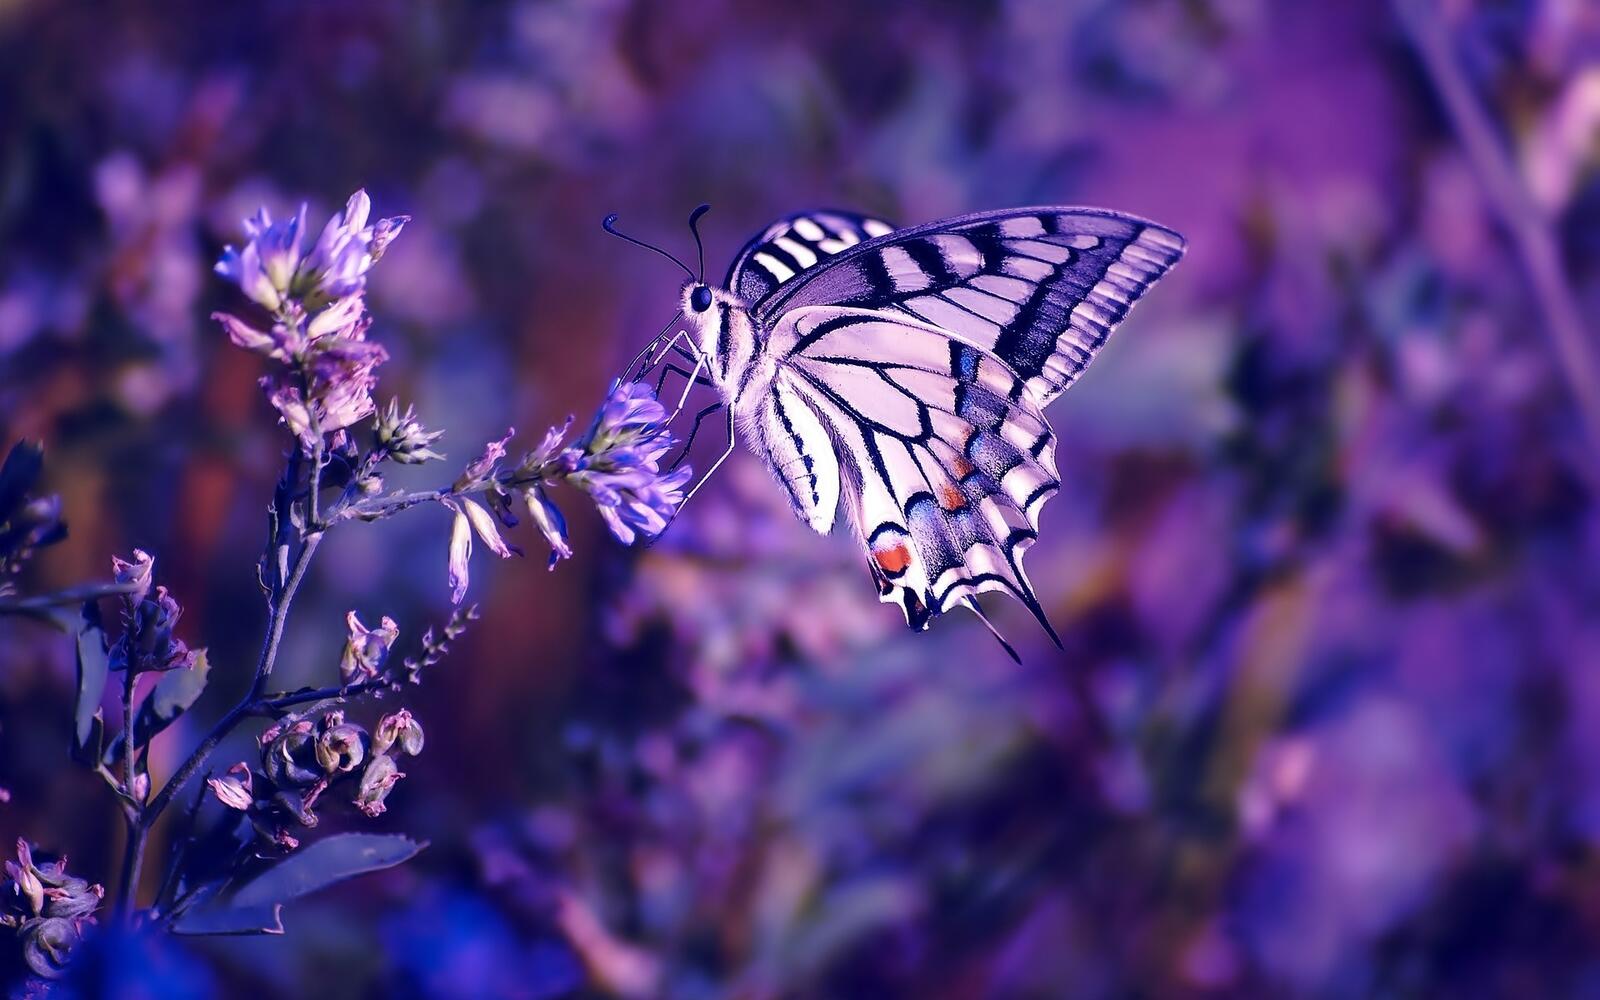 Wallpapers wallpaper butterfly blurred insects on the desktop